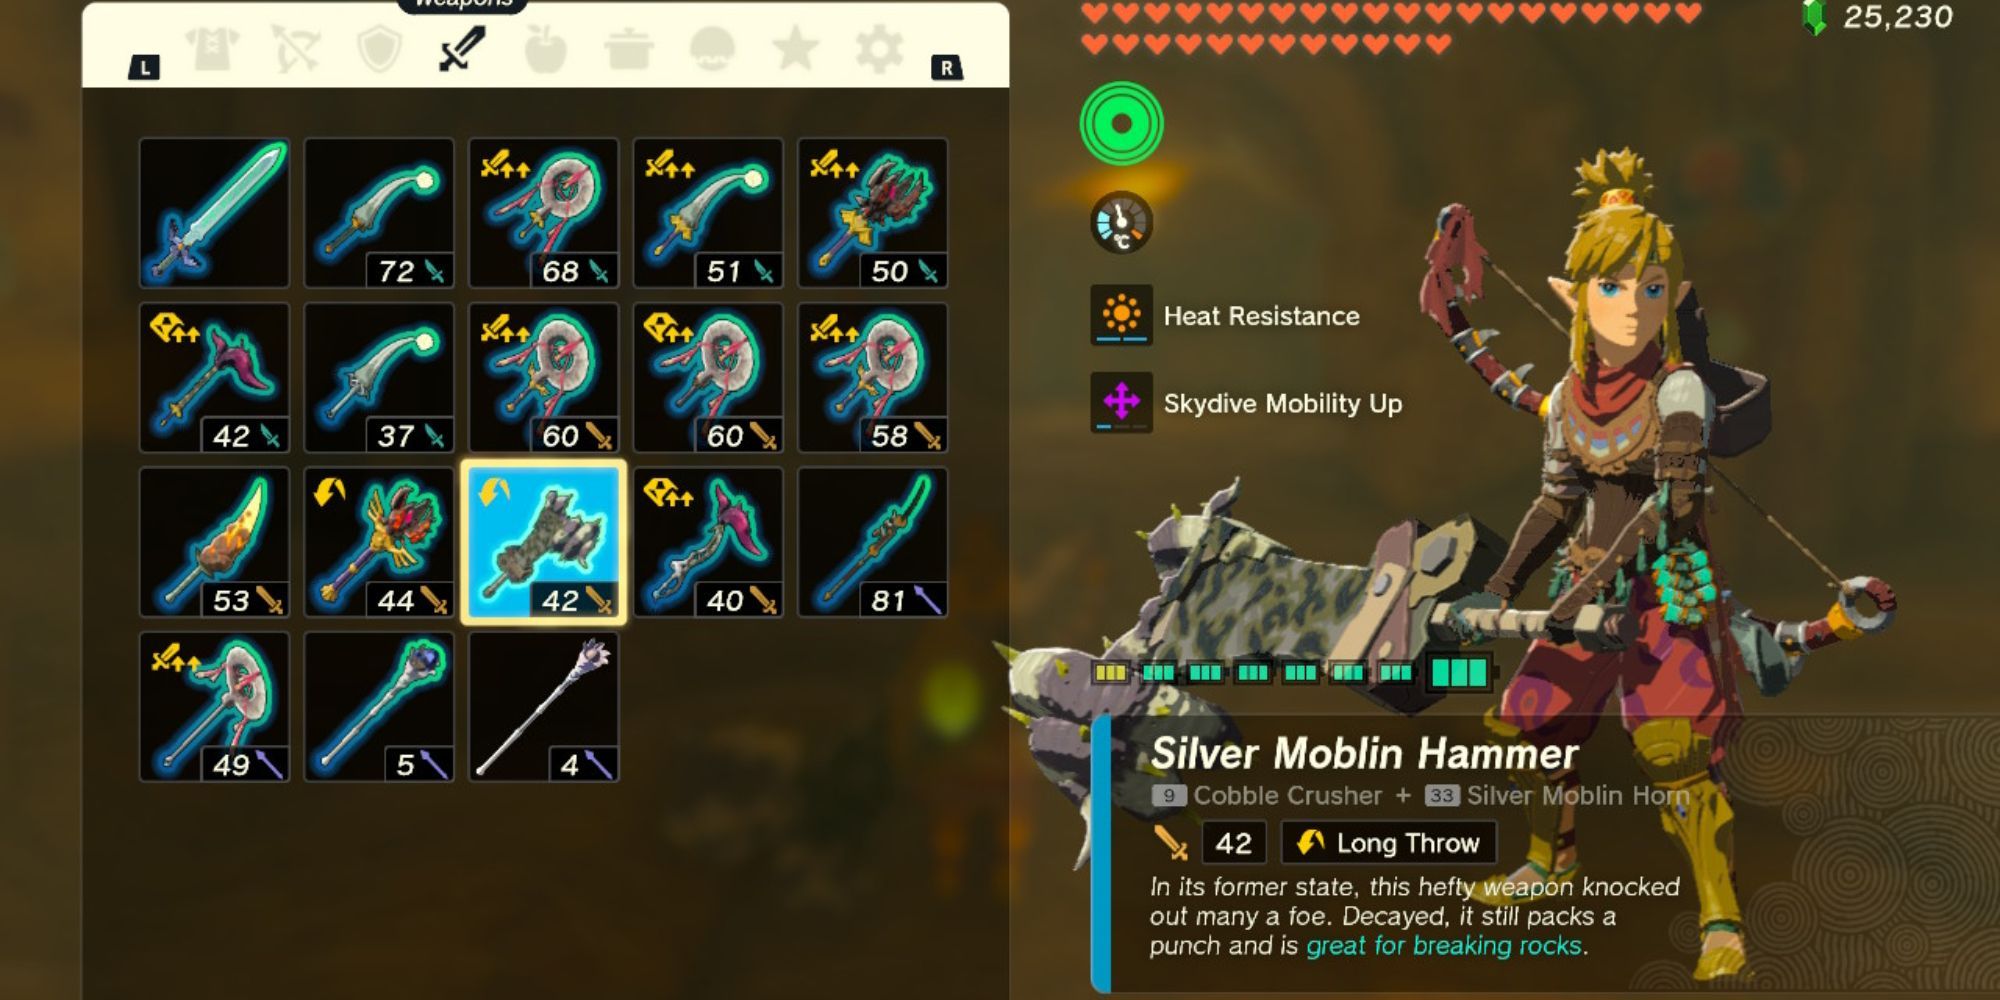 Silver Moblin Hammer in Inventory